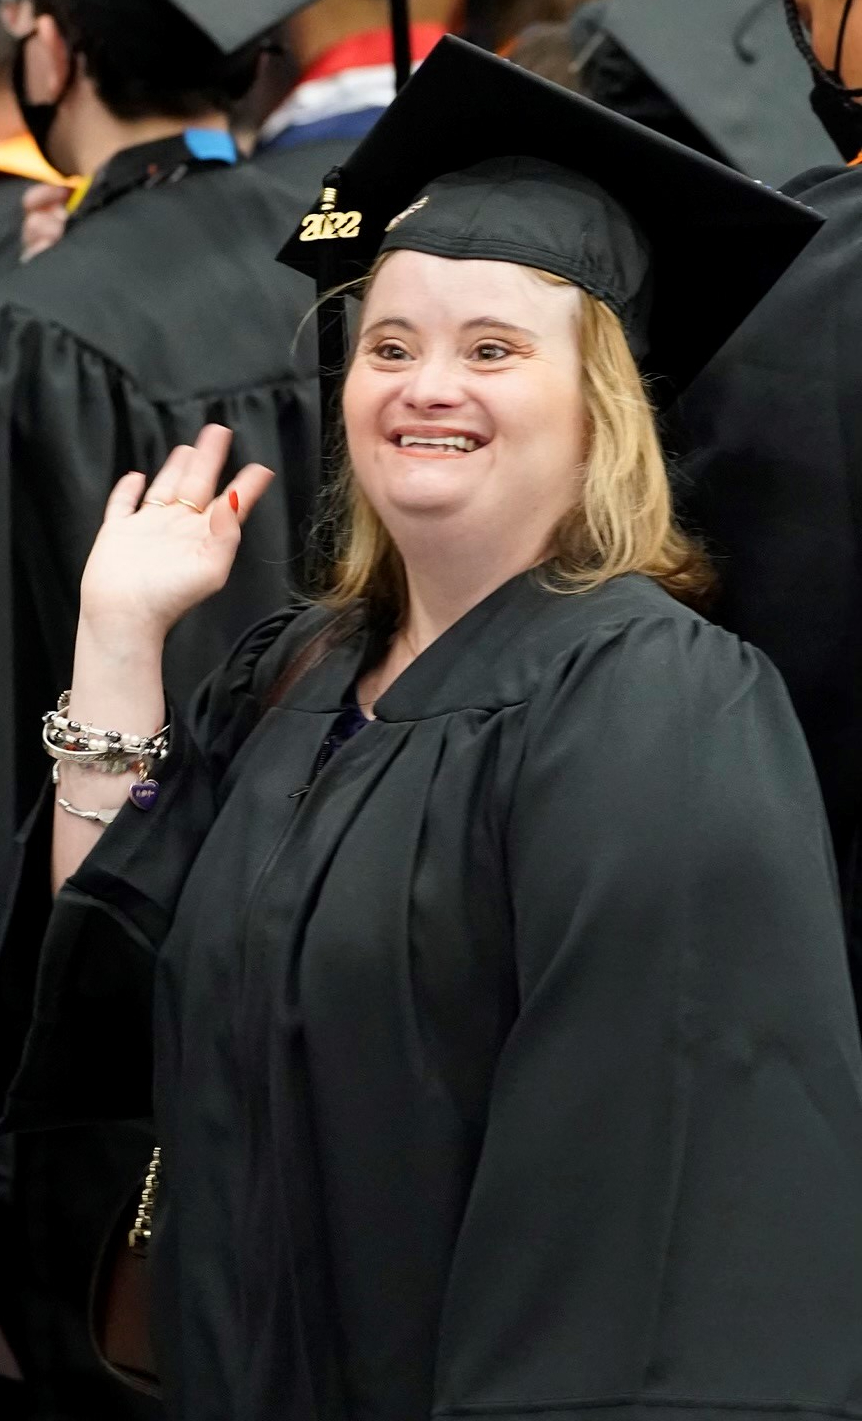 Kayla McKeon earned her General Studies degree 12 years after she began taking classes at OCC. McKeon is the first lobbyist in United States history with Downs Syndrome.